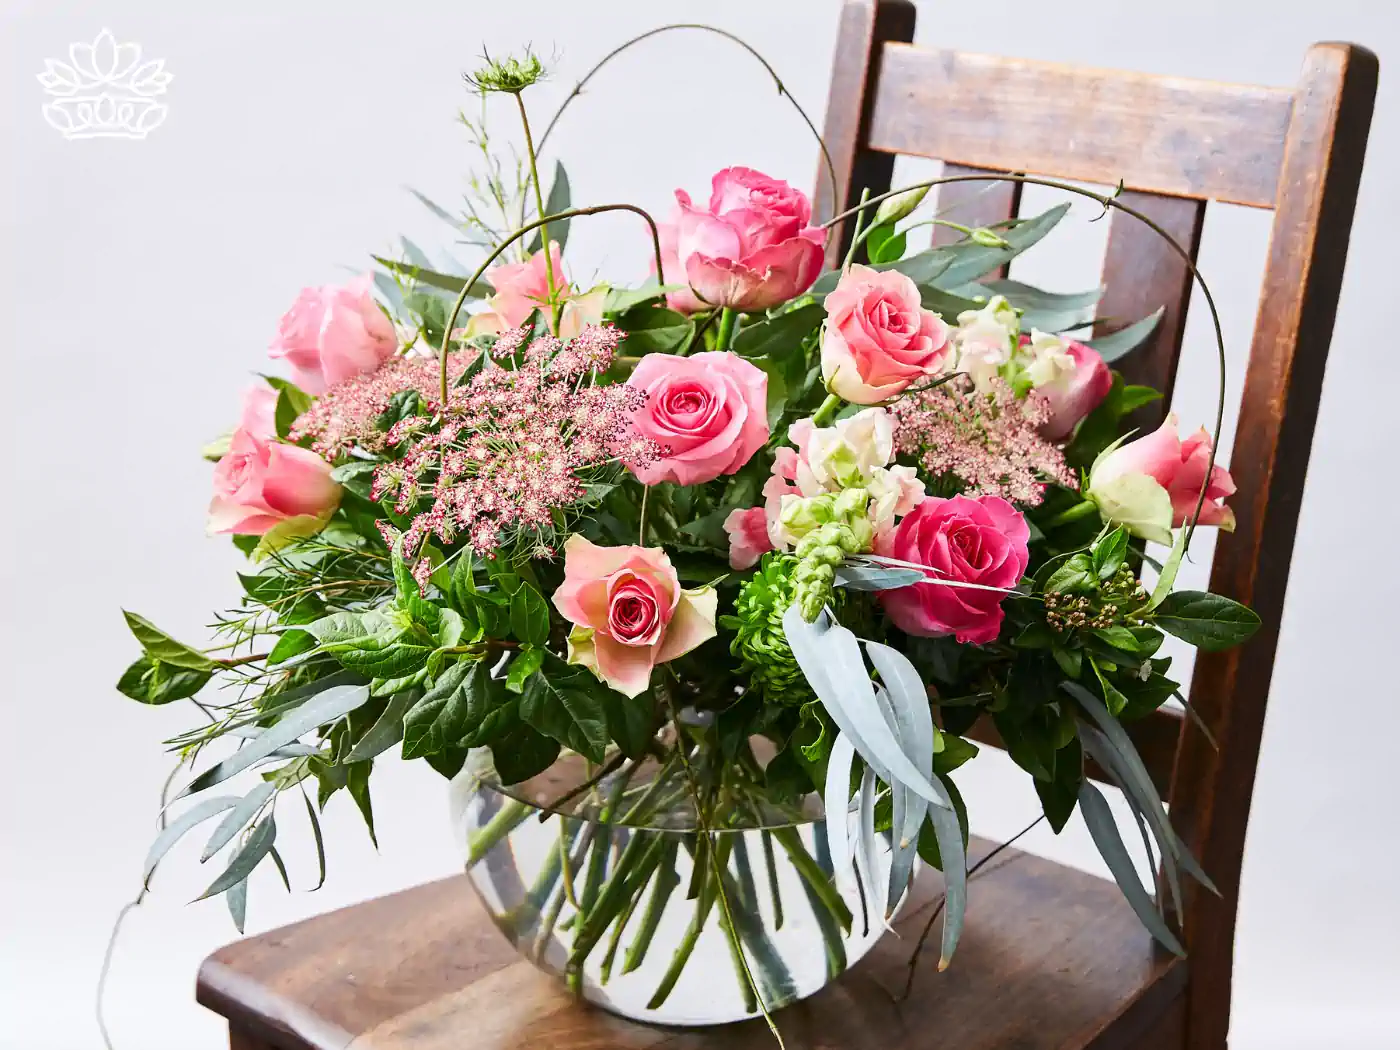 Elegant pink rose bouquet with lush greenery and soft pink accents, artfully arranged in a clear vase on a vintage wooden chair, ideal for front desk decor or reception desk.